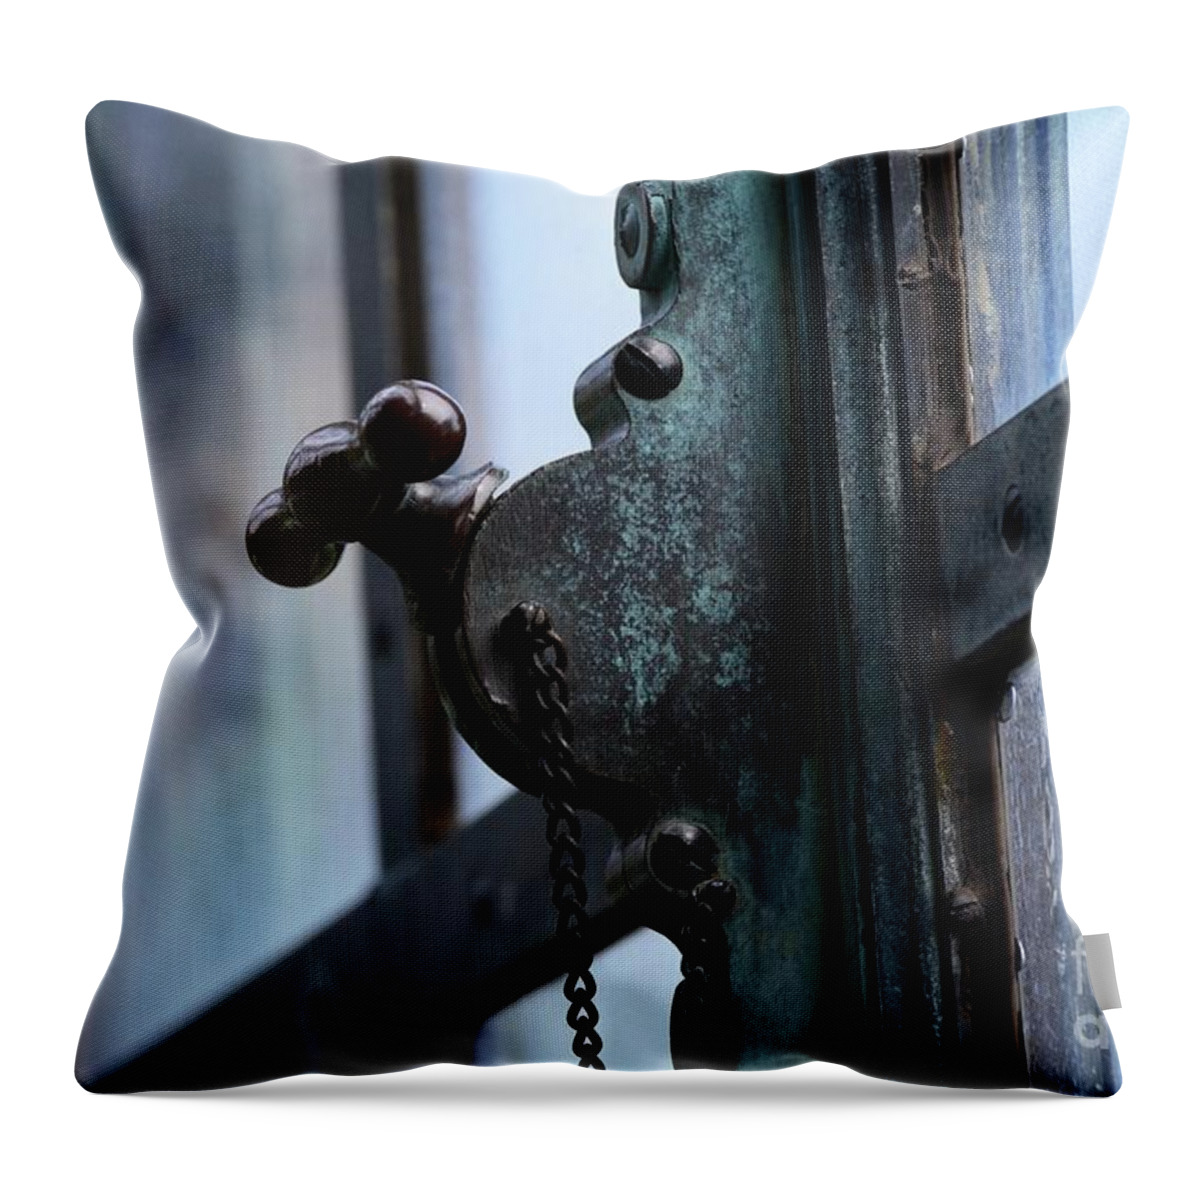 Architecture Throw Pillow featuring the photograph Locked Window by Cindy Manero